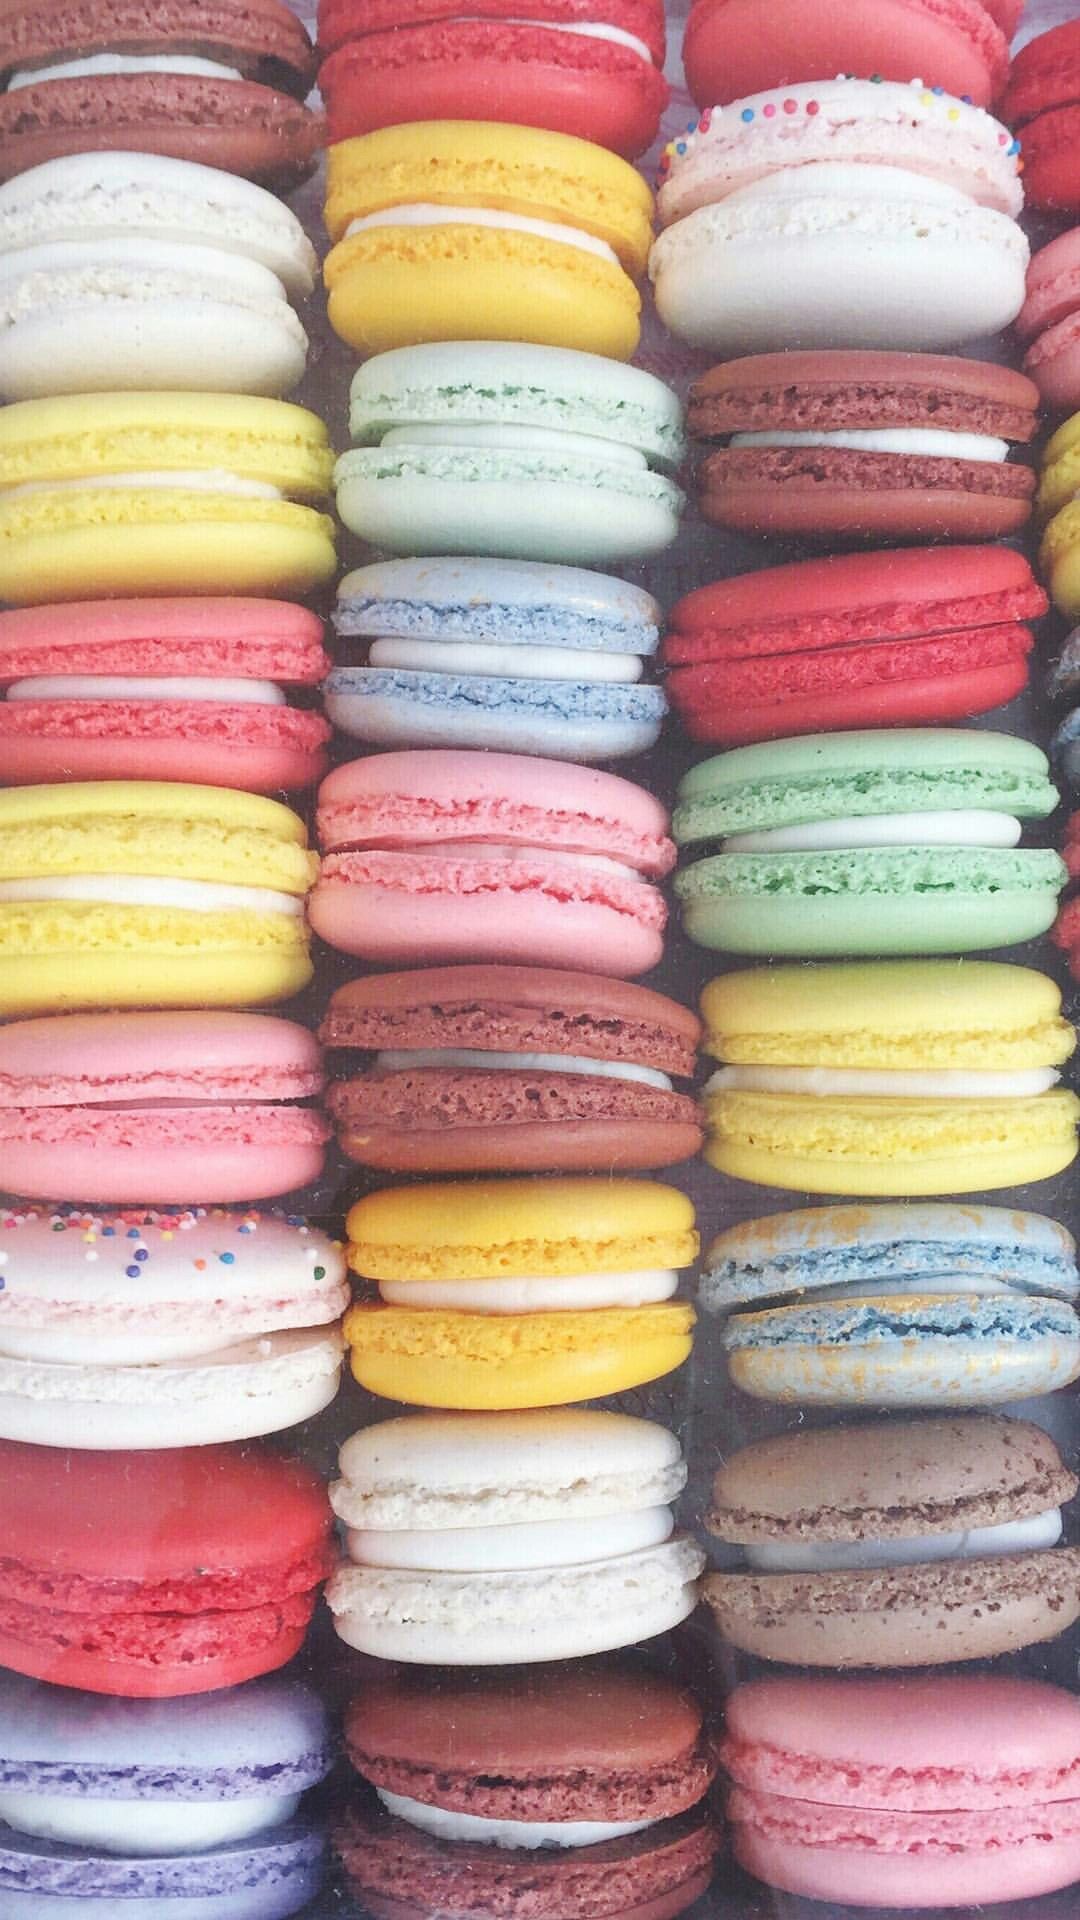 color #colorful #pastel #aesthetic #wallpaper #pretty #sweet #background #macarons #candy #foodie #food. Macaron wallpaper, Candy background, Food wallpaper